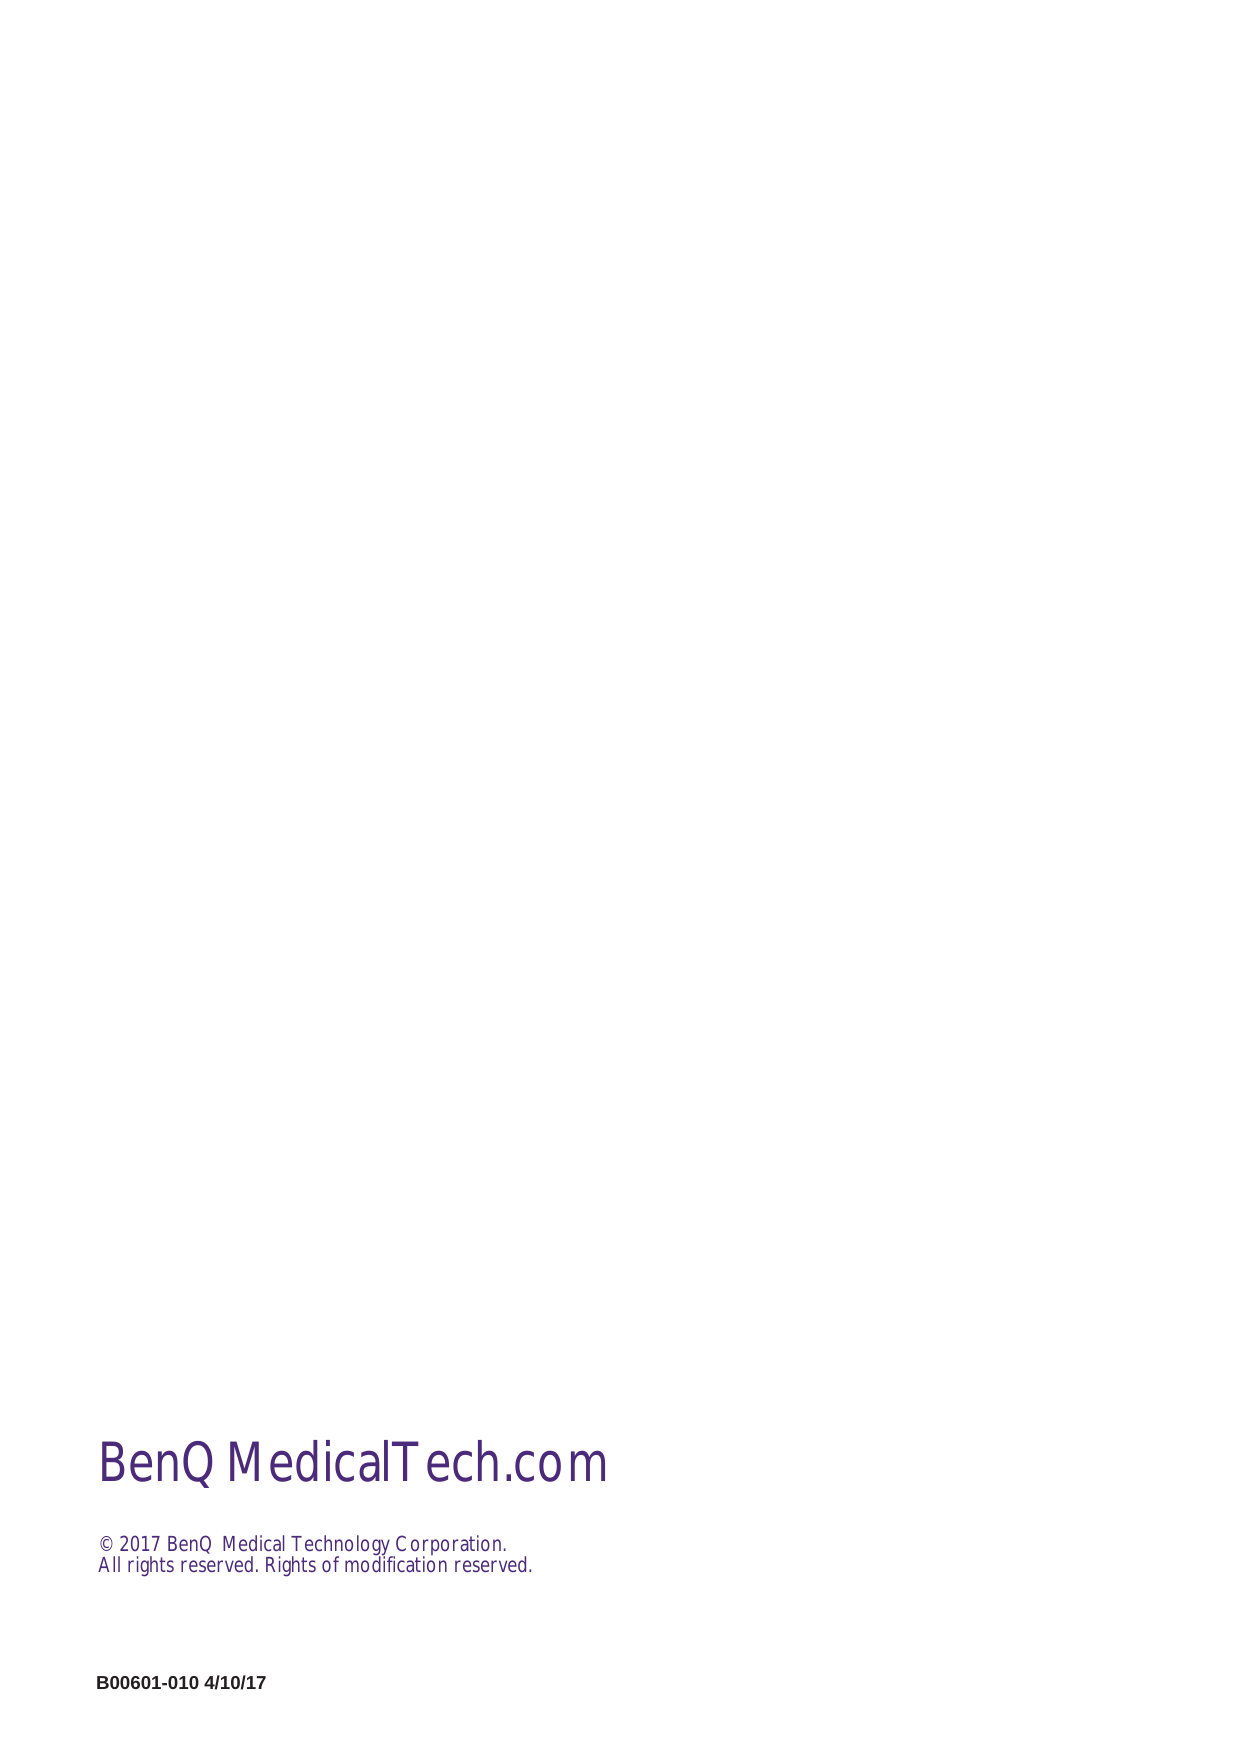 B00601-010 4/10/17BenQMedicalTech.com© 2017 BenQ Medical Technology Corporation.All rights reserved. Rights of modification reserved.